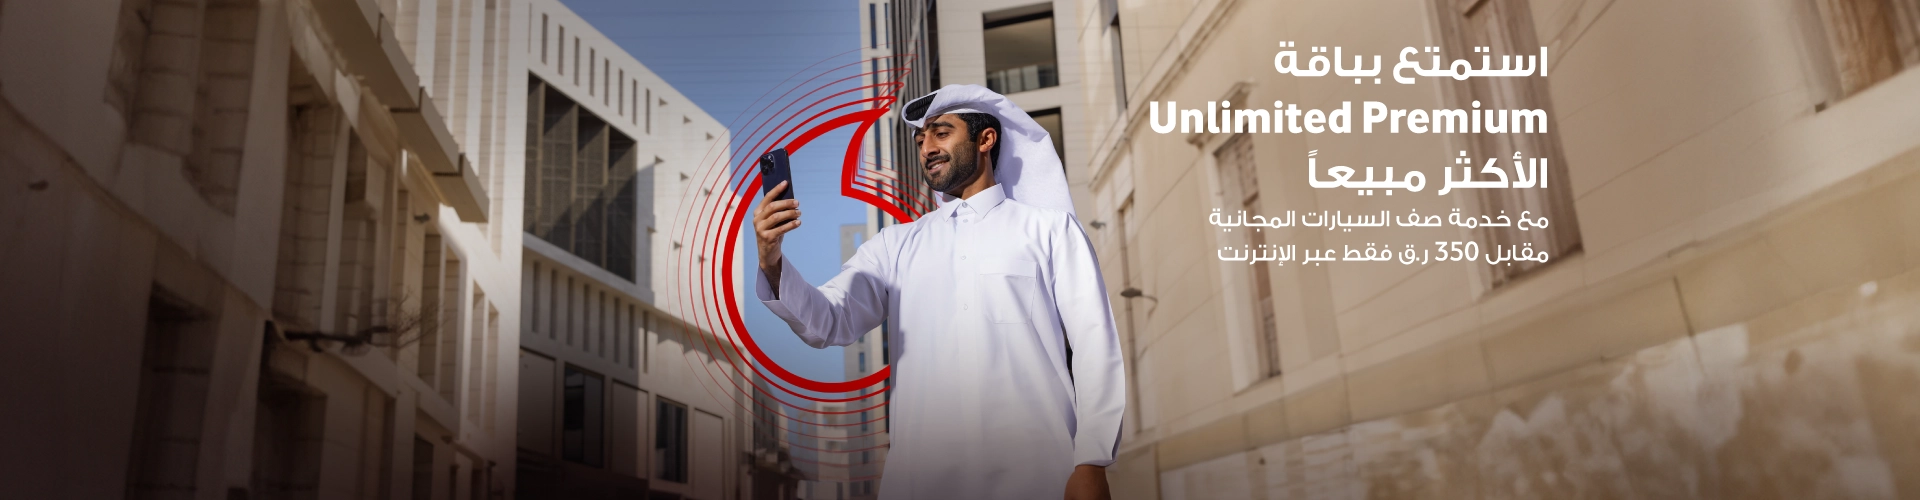 Experience enhanced unlimited Postpaid plans starting from QR 225